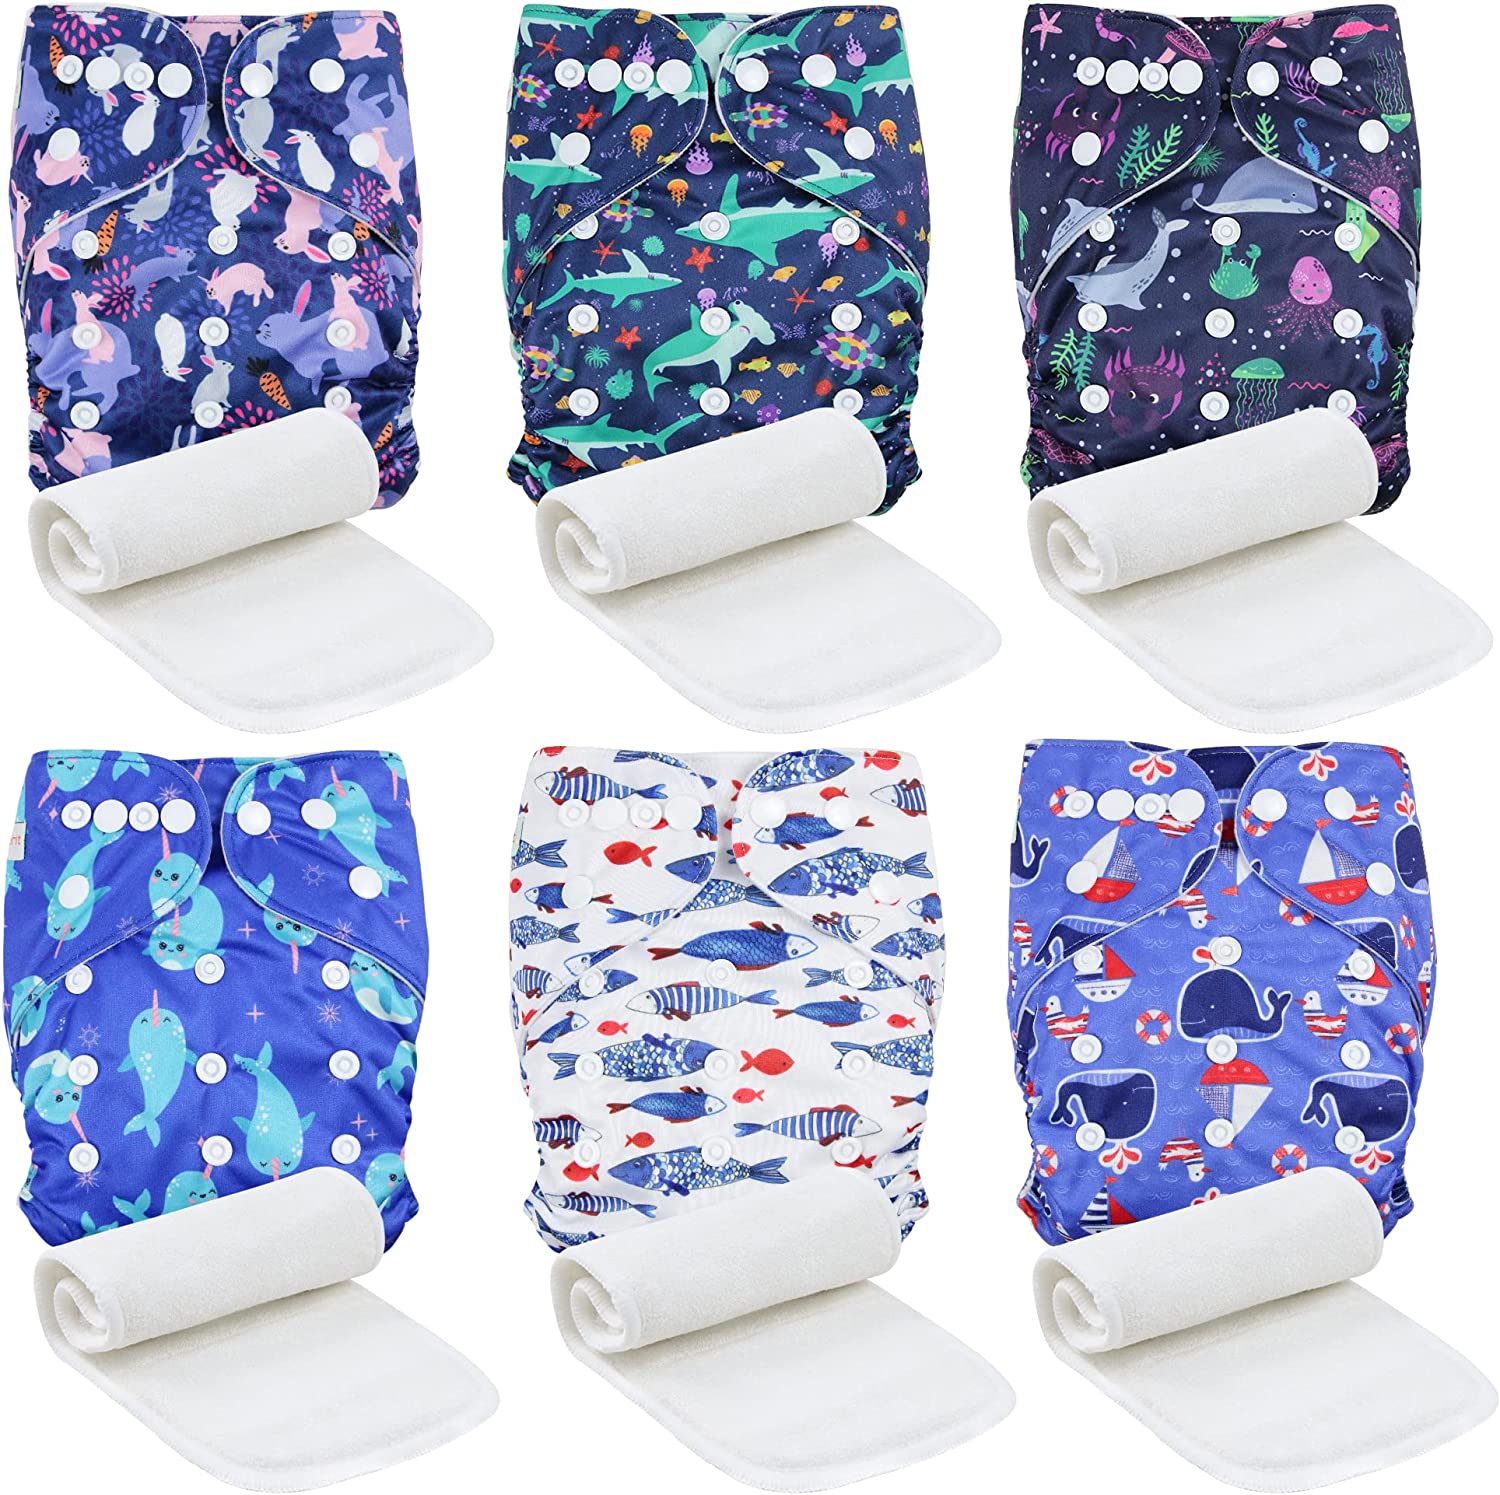 Langsprit 6 Pack Baby Cloth Diaper with Highly Absorbent Inserts, Baby Reusable Diapers, Cloth Diapers Newborn, Washable Cloth Diapers, Reusable Unisex Baby Diapers